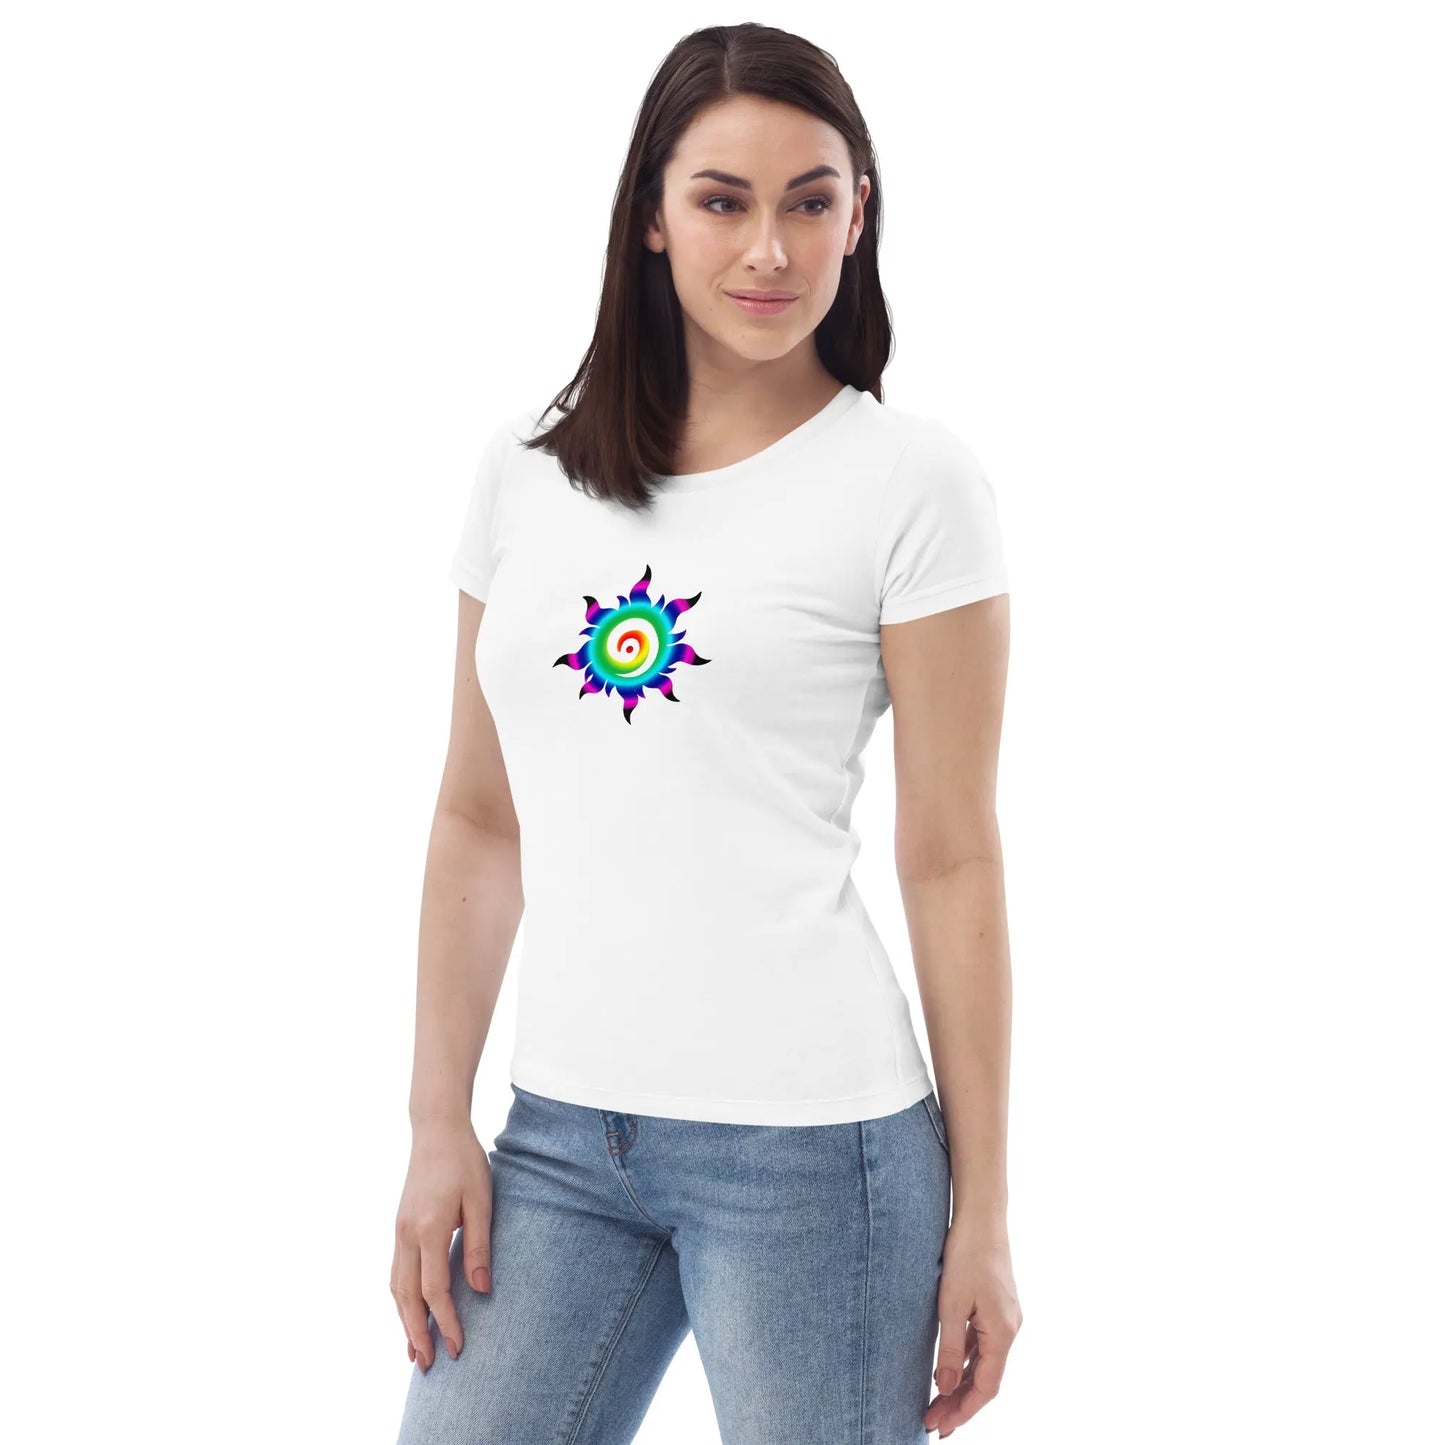 Women's fitted eco tee ActSunx - Image #22